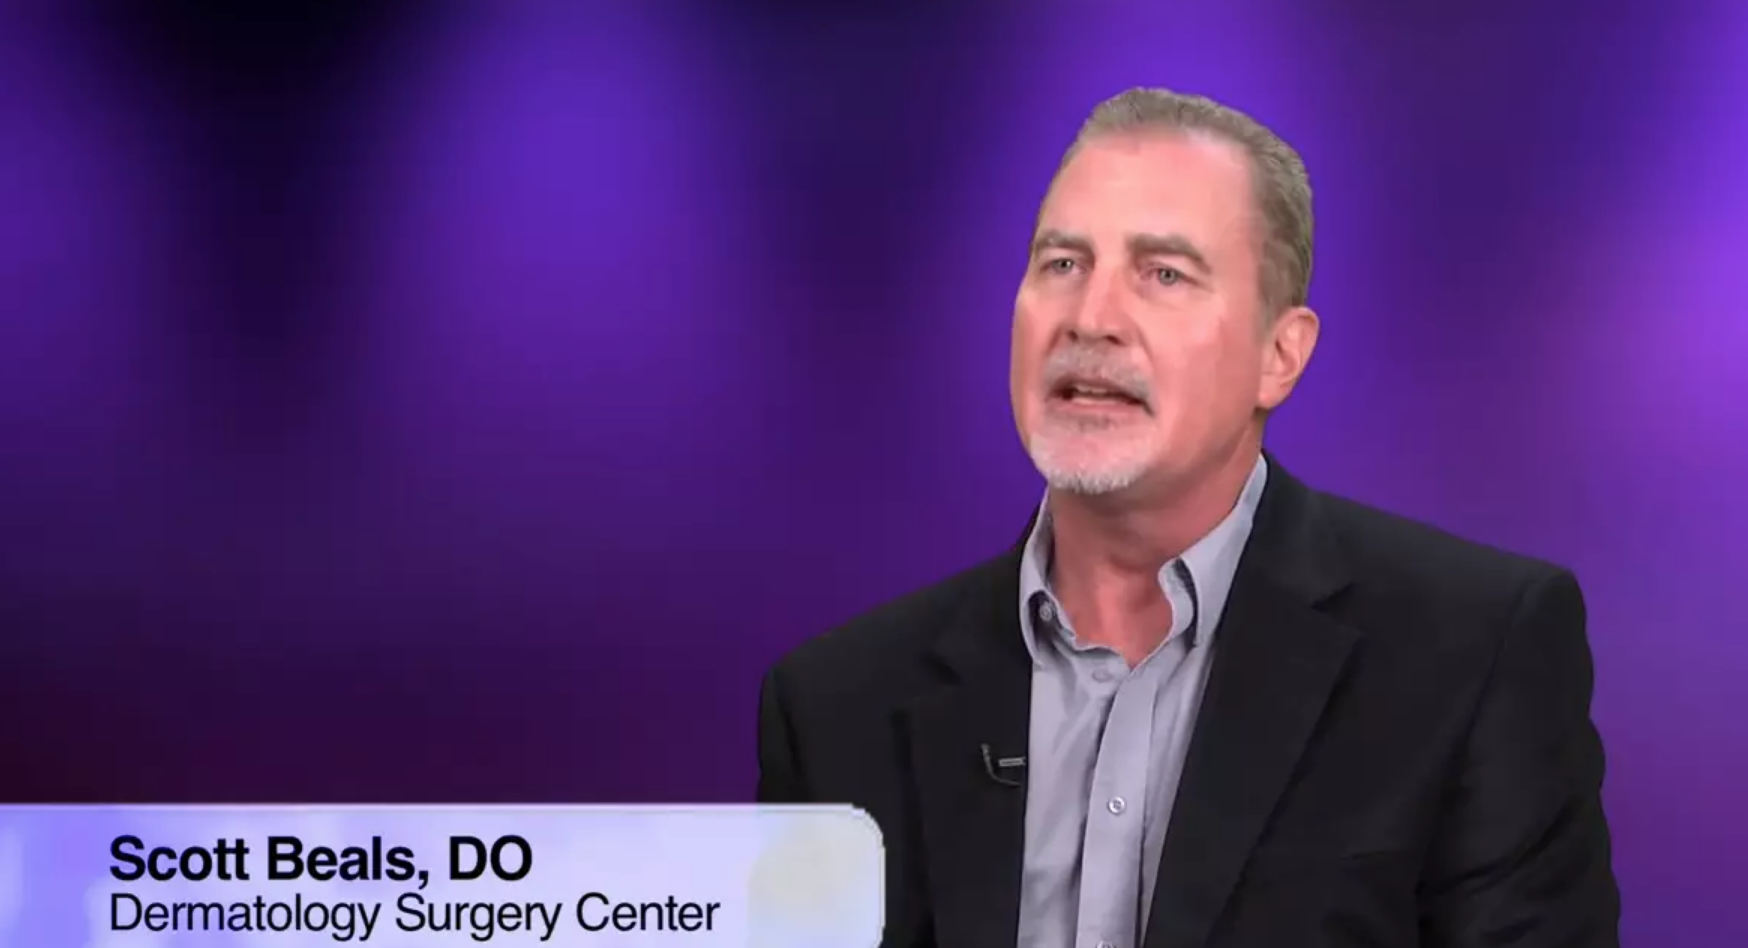 Scott Beals, DO, on How Modernizing Medicine®’s Dermatology EHR is Fast and Easy